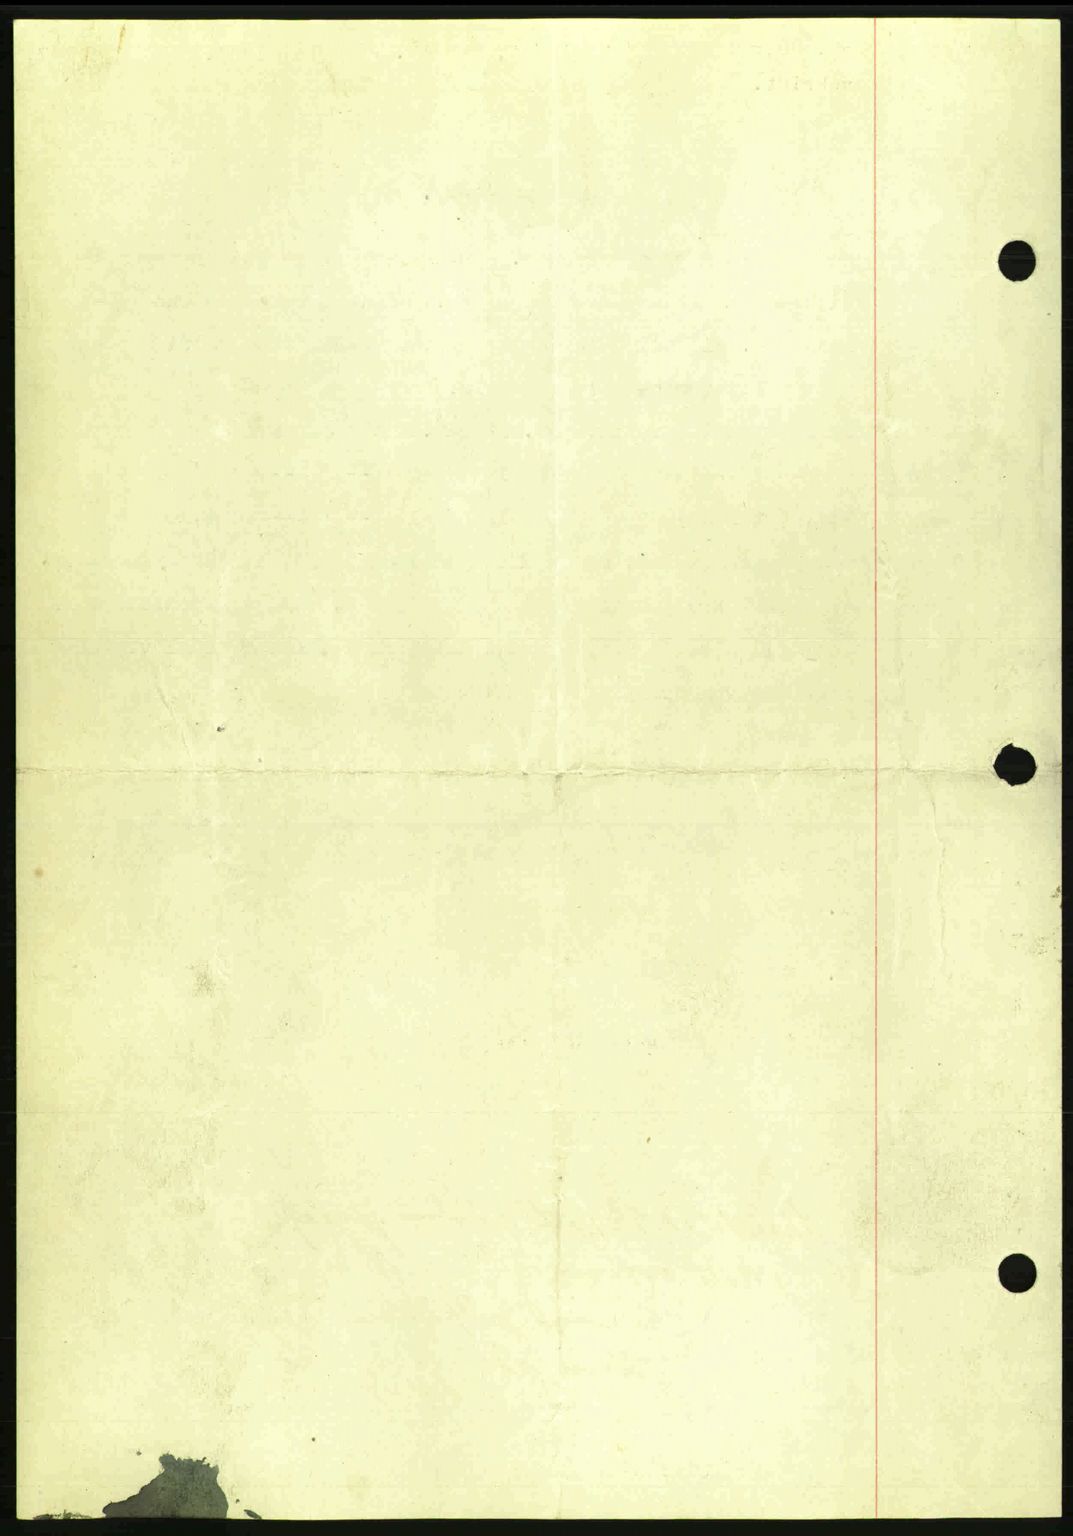 Indre Sogn tingrett, SAB/A-3301/1/G/Gb/Gba/L0030: Mortgage book no. 30, 1935-1937, Deed date: 17.12.1935